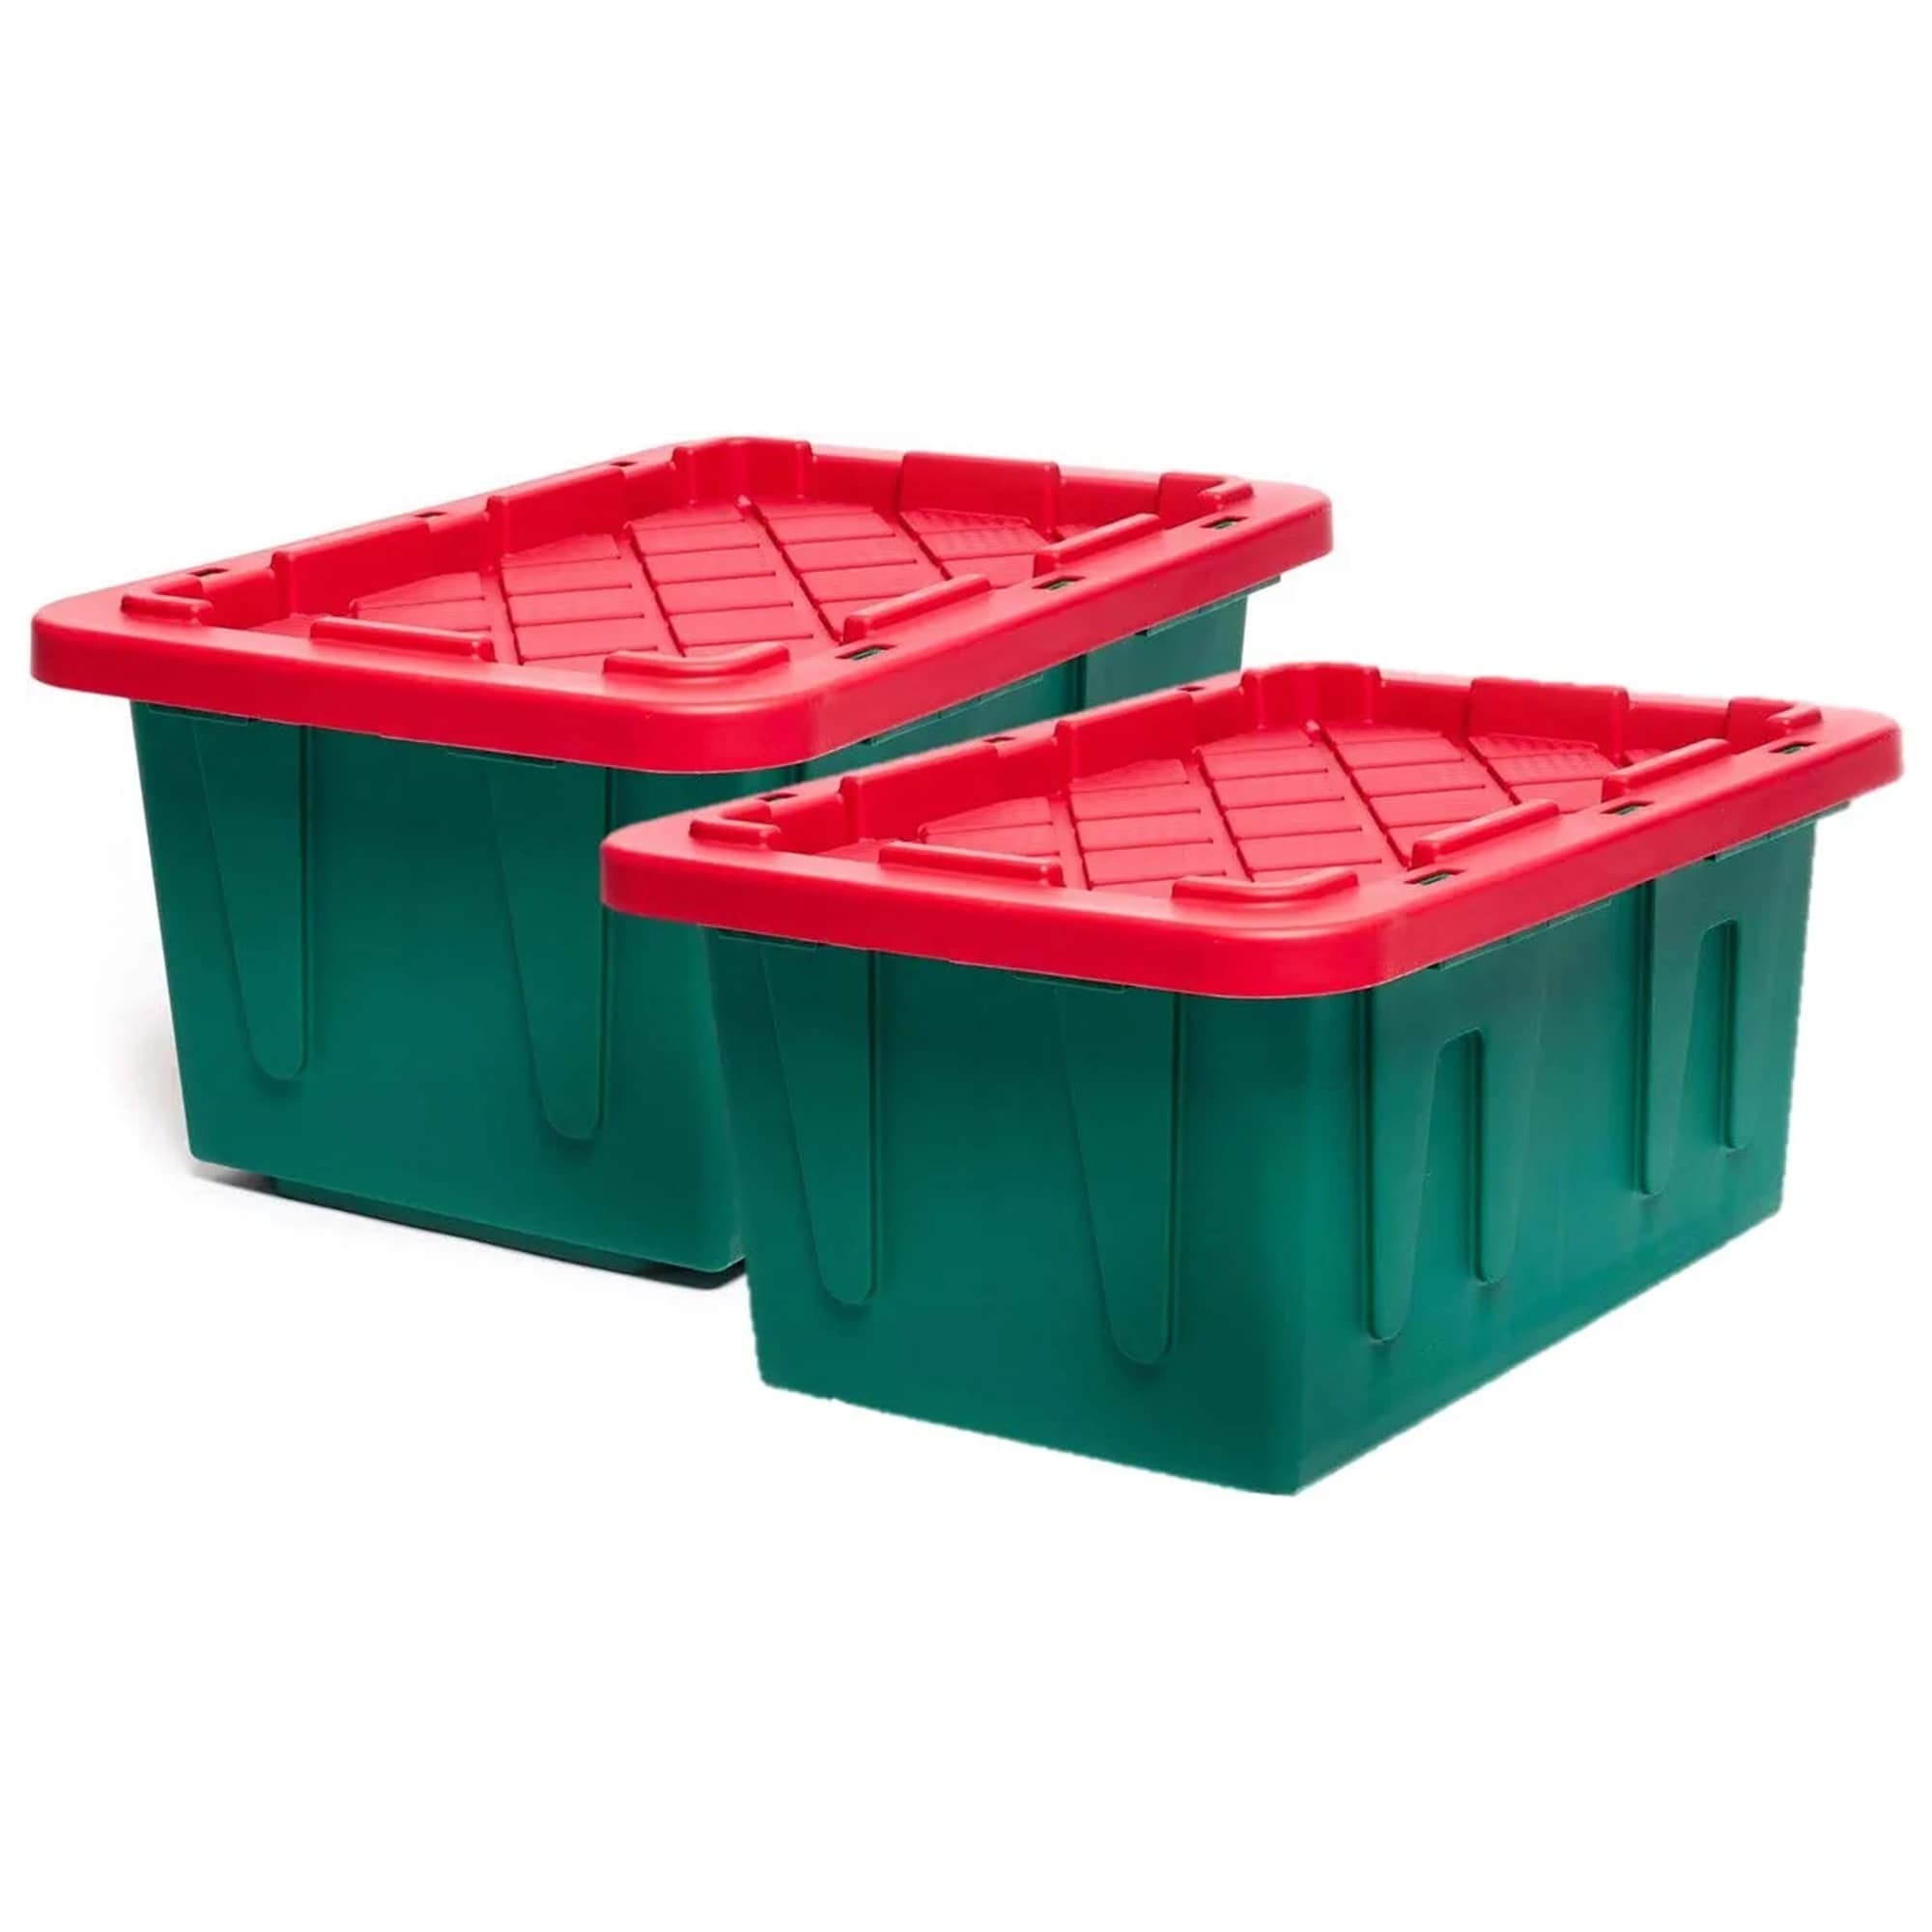 https://ak1.ostkcdn.com/images/products/is/images/direct/ad1b5959b99536a794a3bd3ea9c2357b97ee70cc/HOMZ-Durabilt-15-Gallon-Heavy-Duty-Holiday-Storage-Tote%2C-Green-Red-%284-Pack%29.jpg